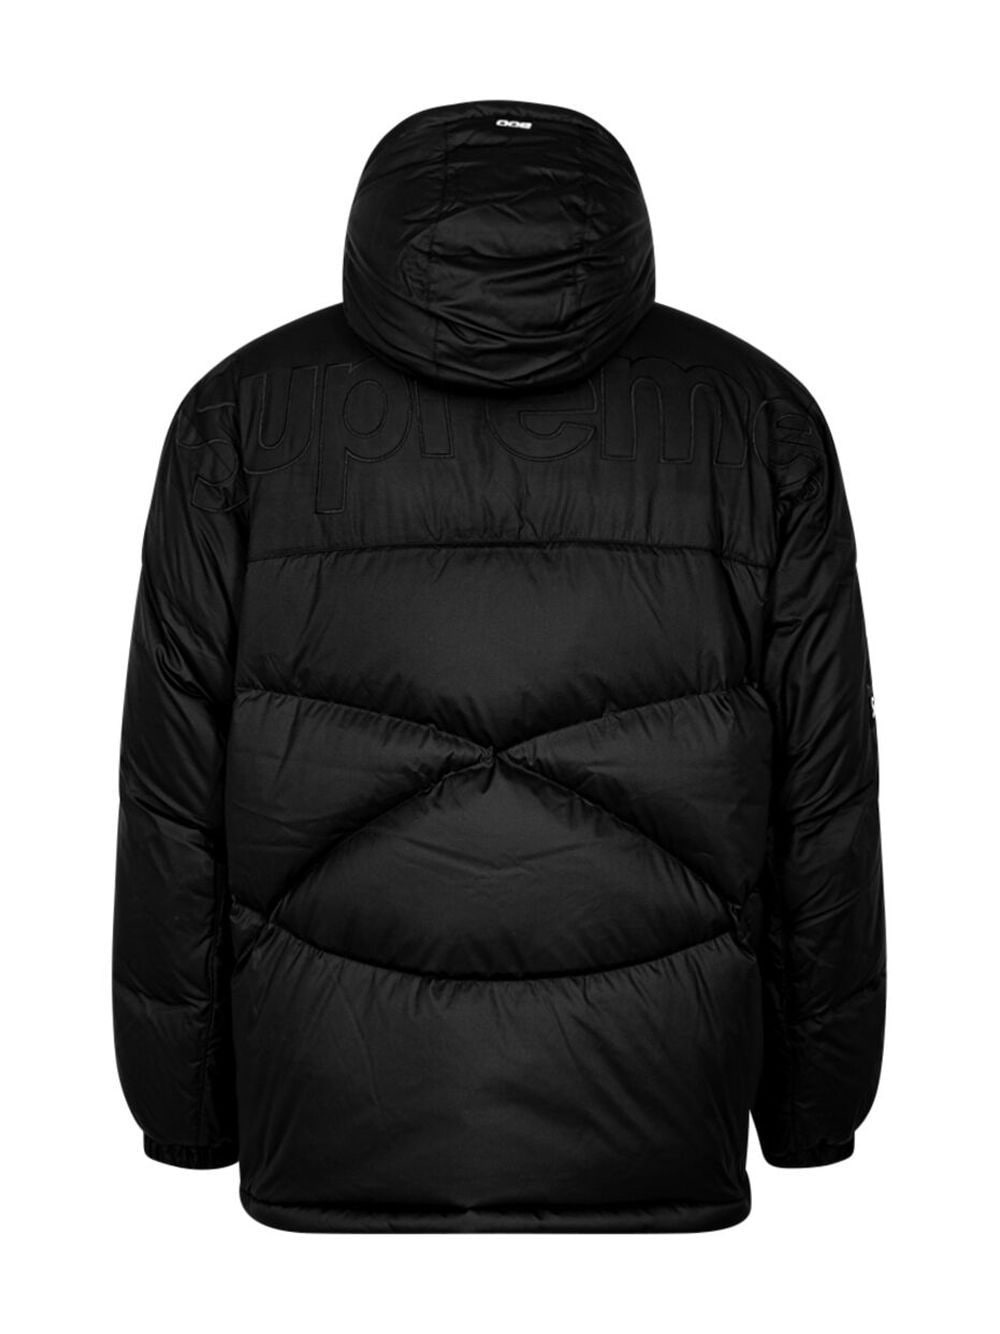 x The North Face 800-Fill pullover jacket - 2